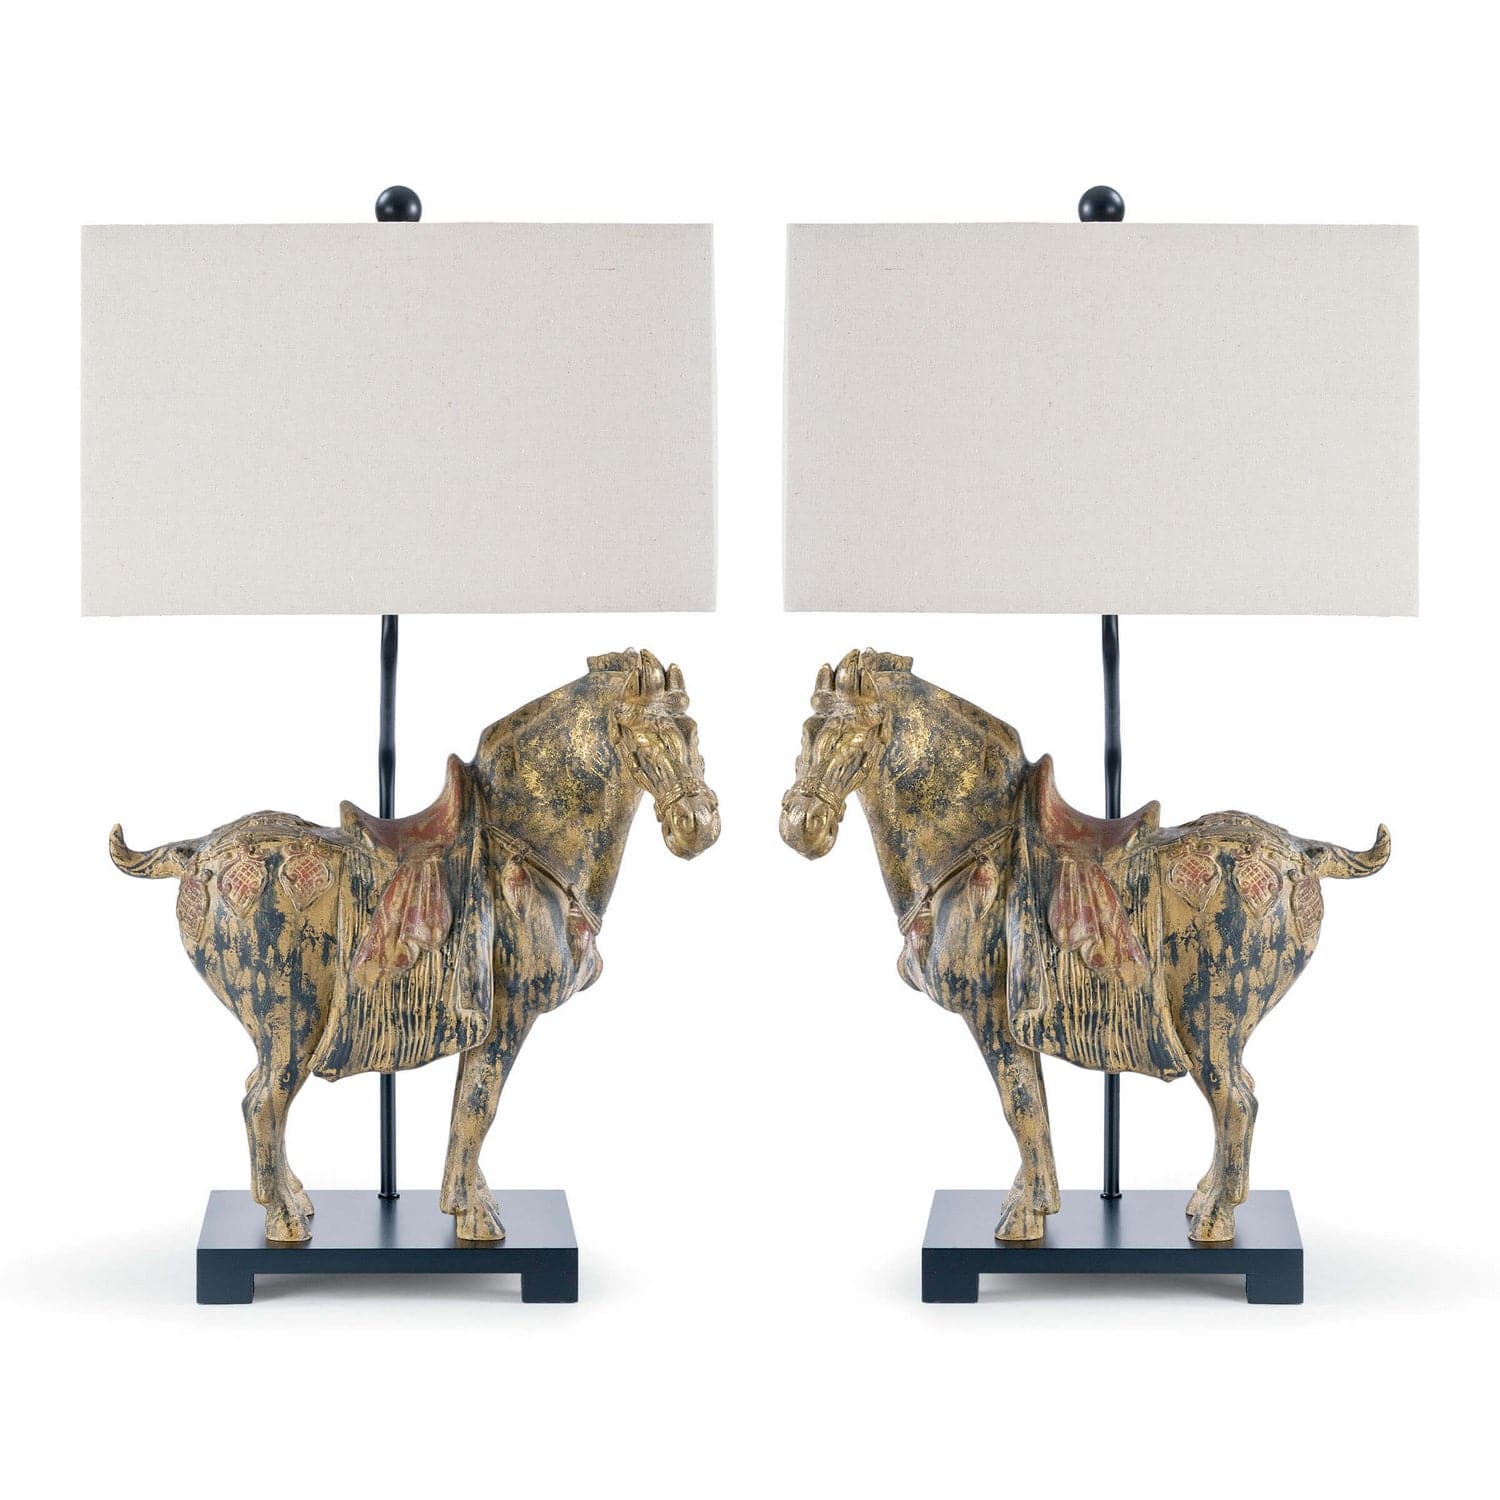 Regina Andrew - 13-1111 - One Light Table Lamp - Dynasty - Distressed Painted